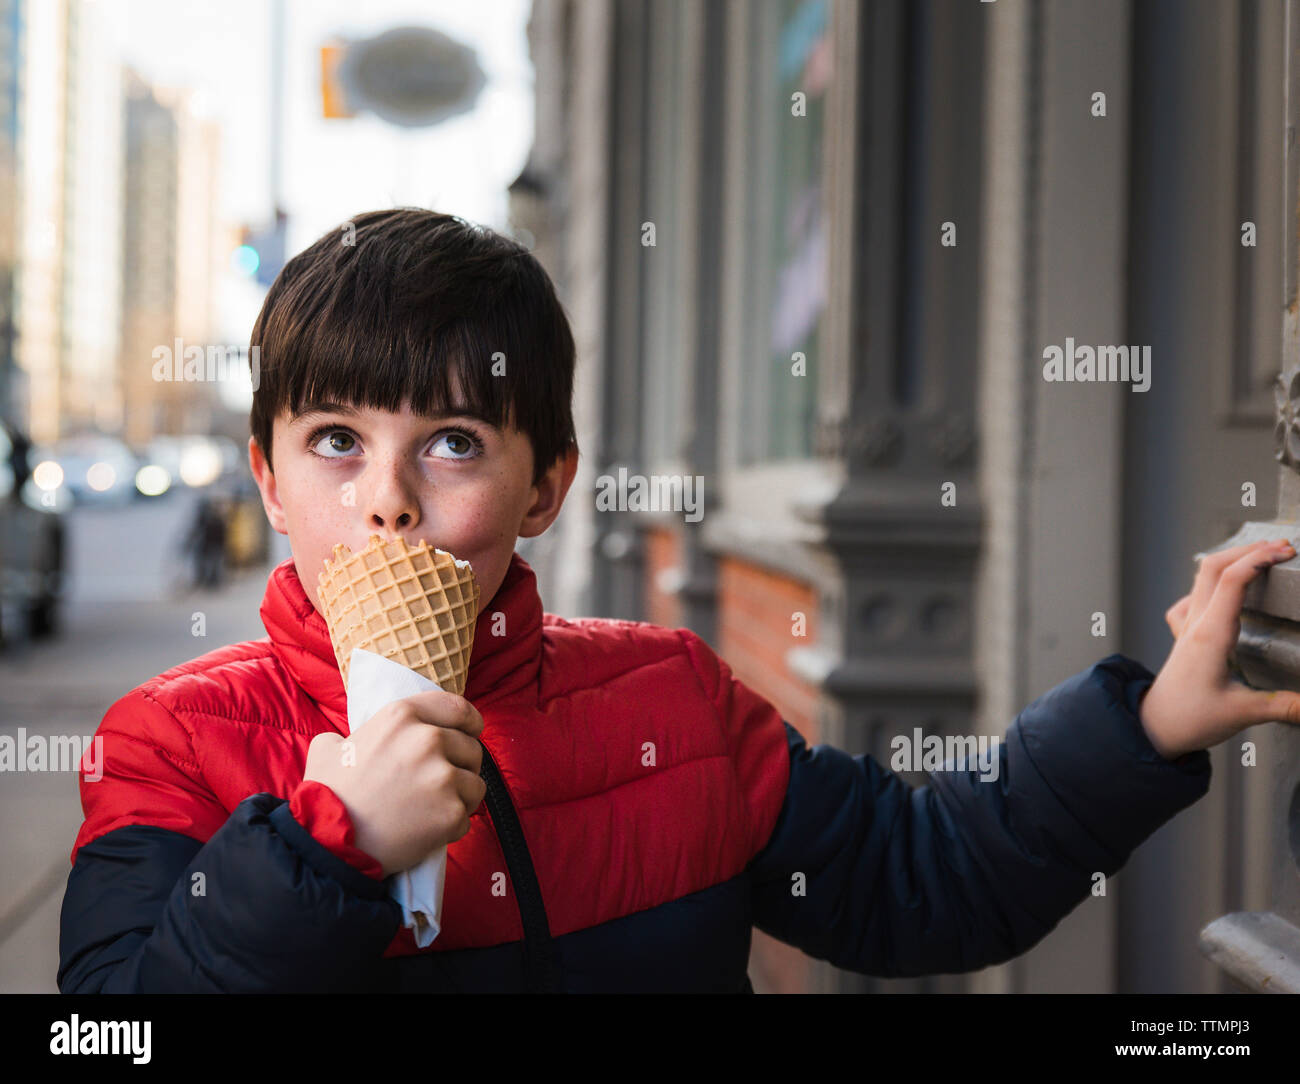 Boy looking up while eating ice cream on footpath in city Stock Photo